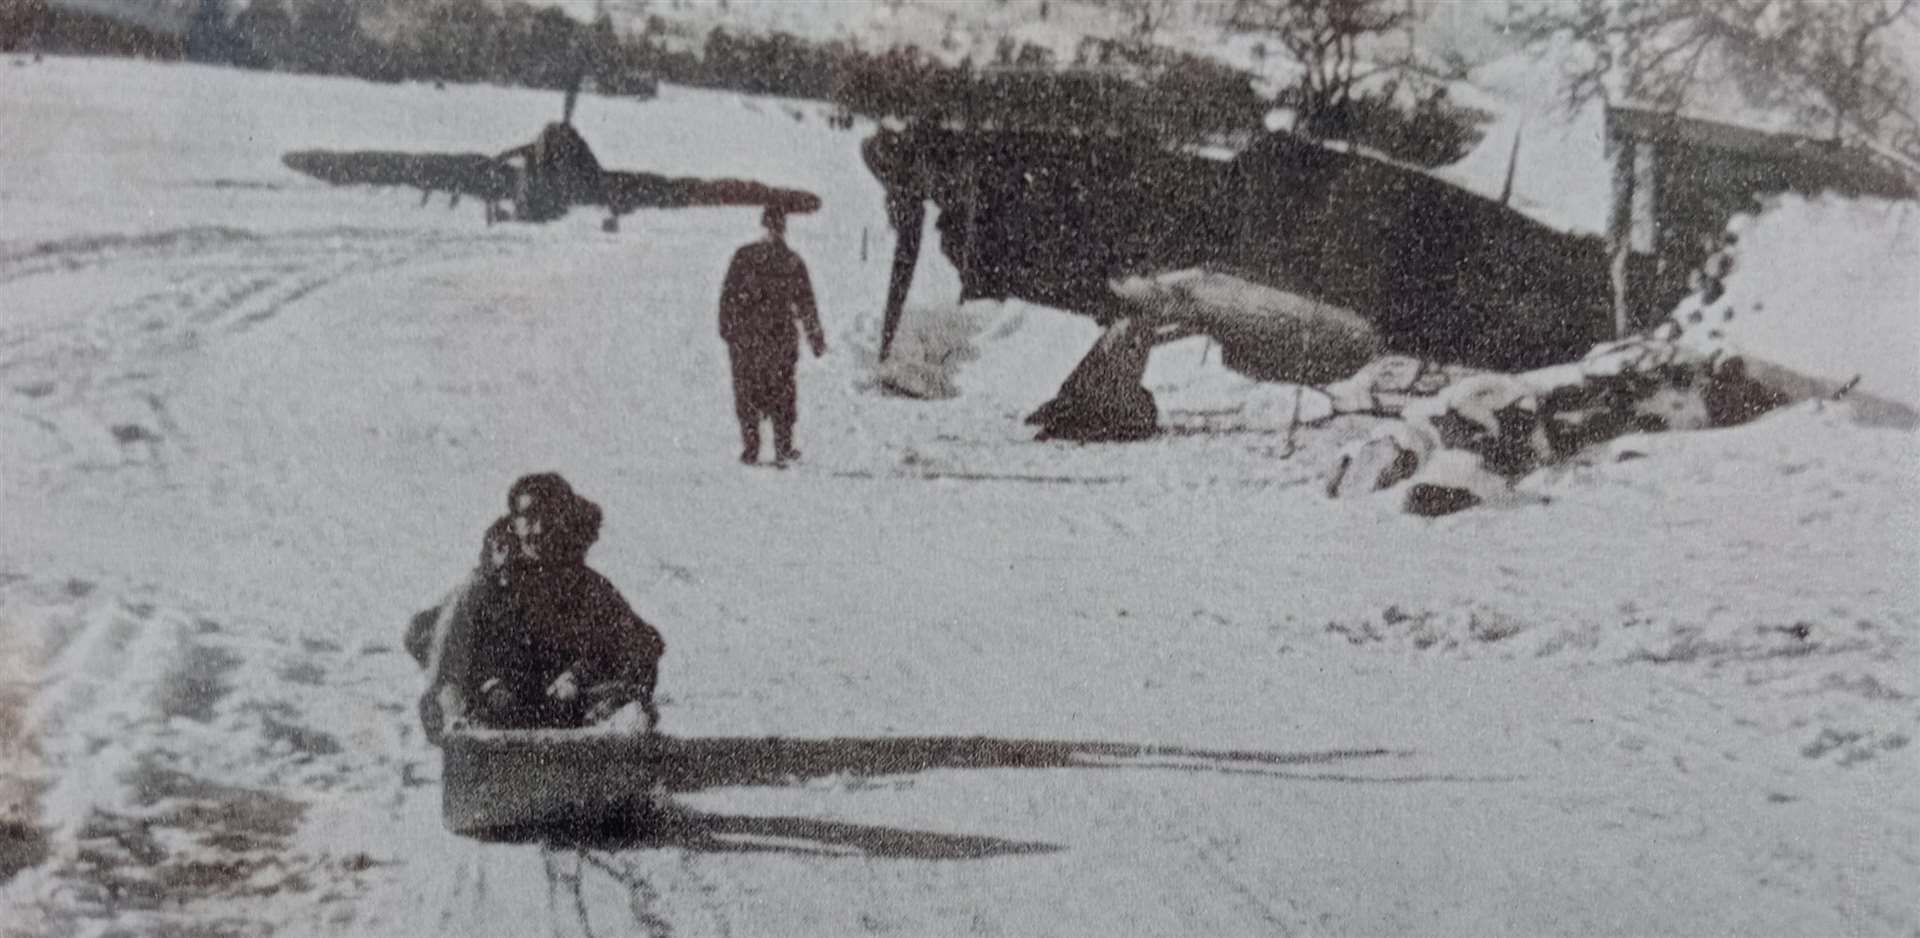 The Hawker Hurricane was salvaged from the Arctic Circle